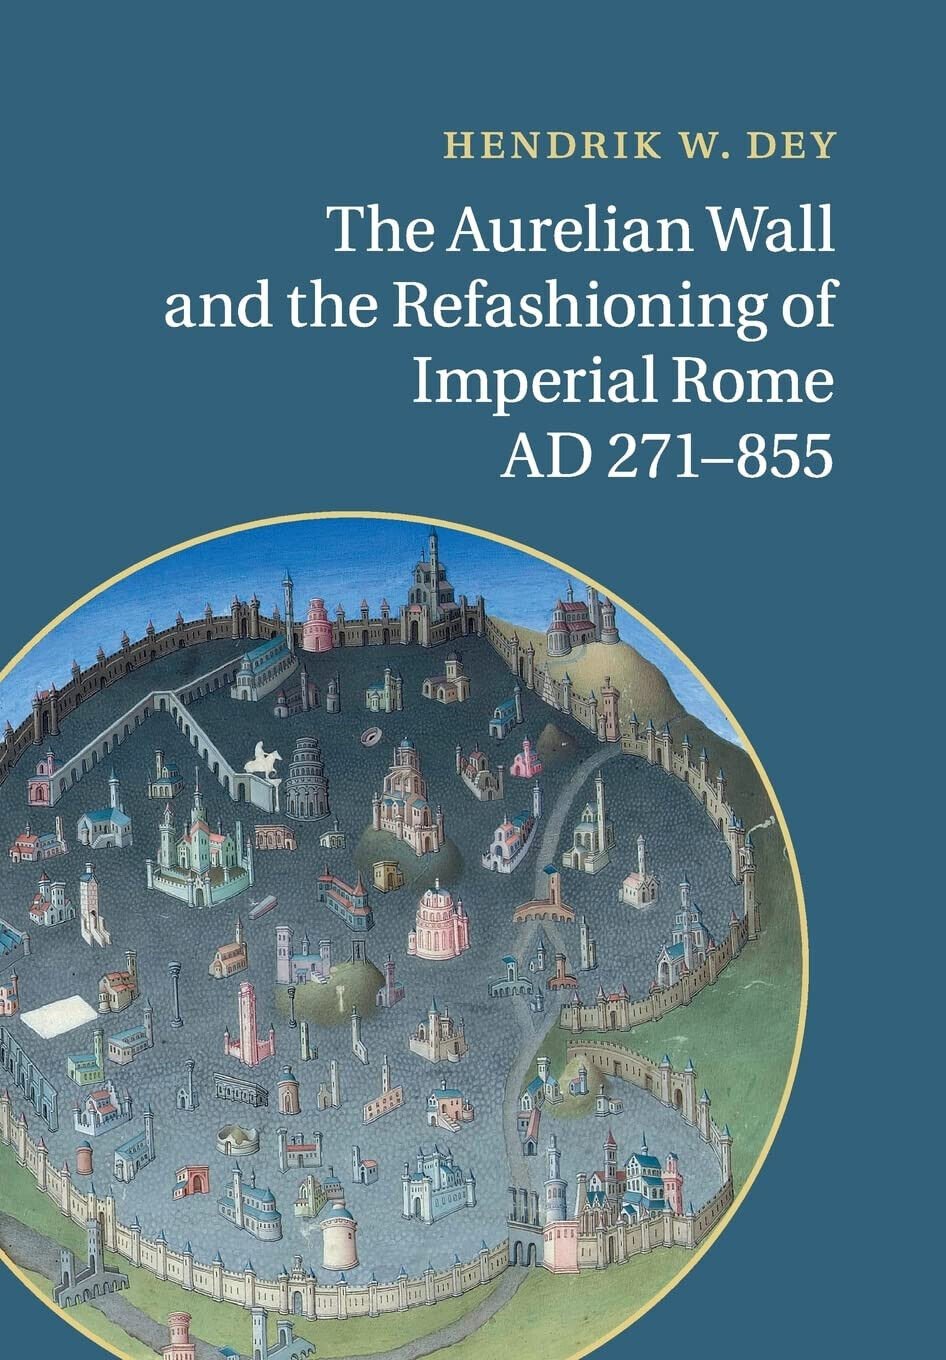 The Aurelian Wall and the Refashioning of Imperial Rome, AD 271-855 - 2022